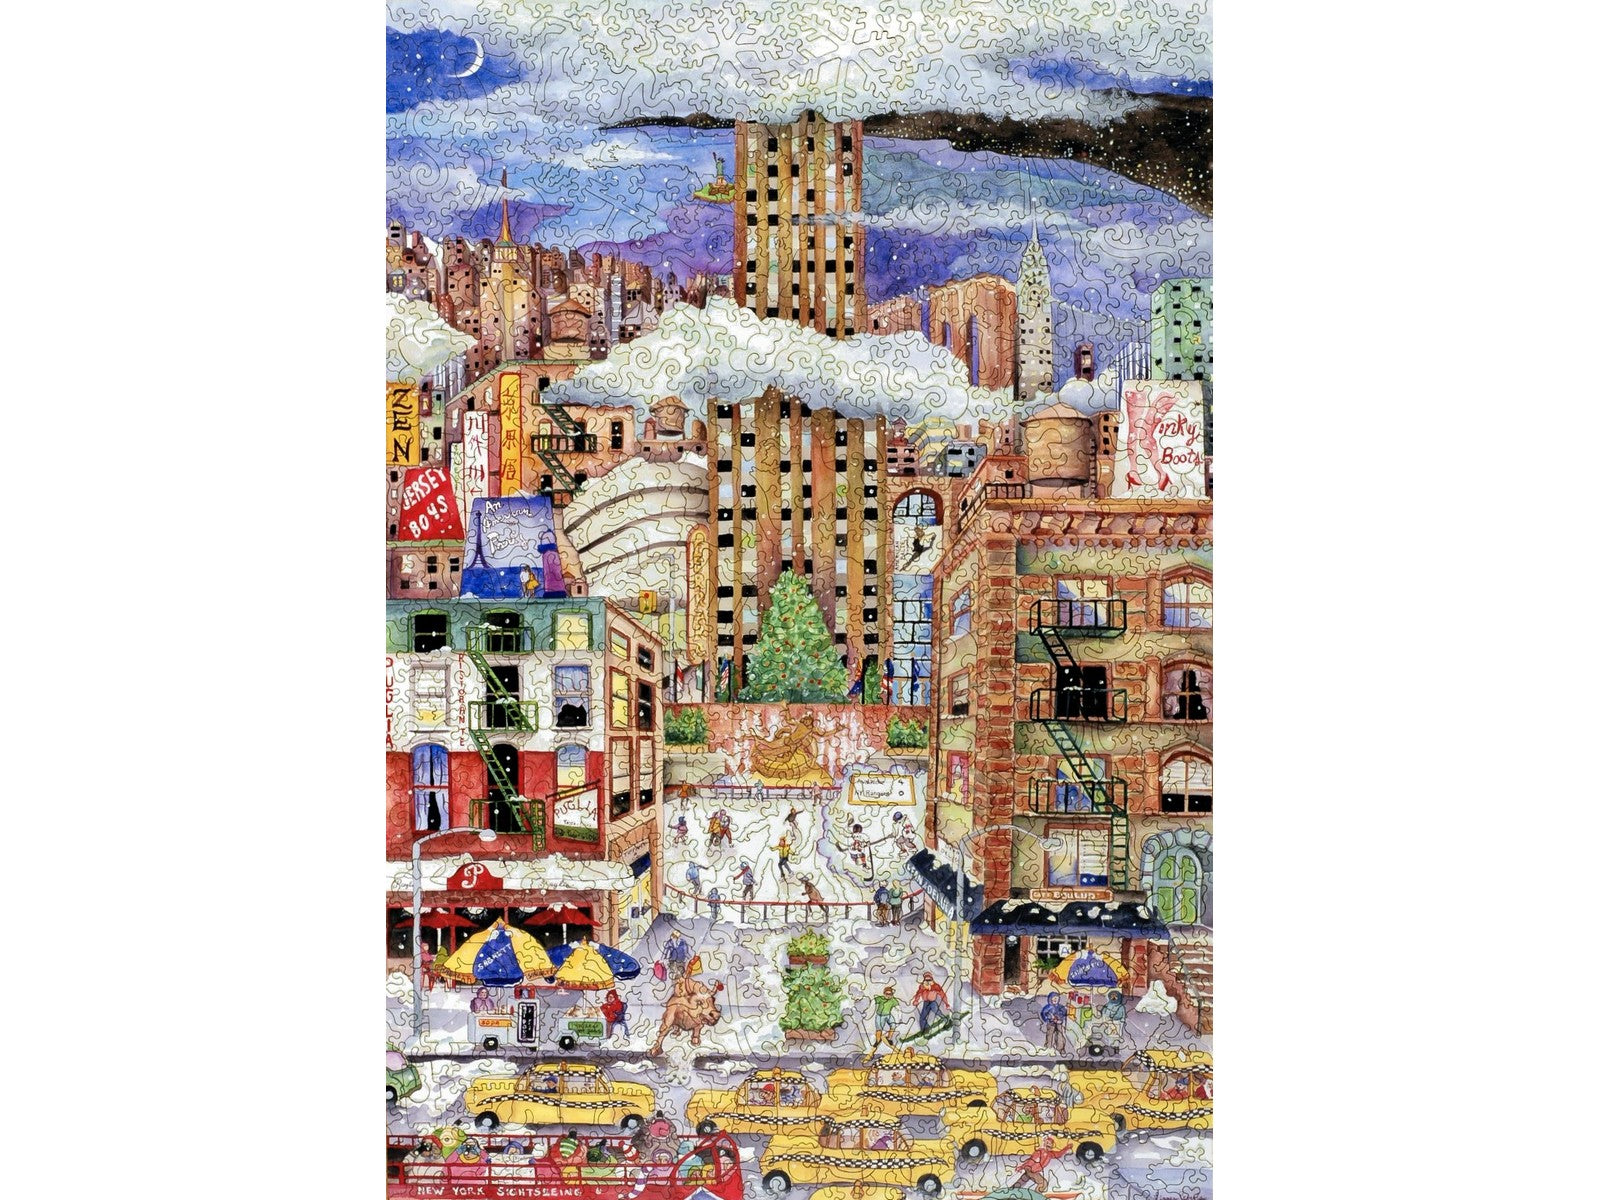 The front of the puzzle, Light Snowfall in New York, showing a winter scene in New York City at night.